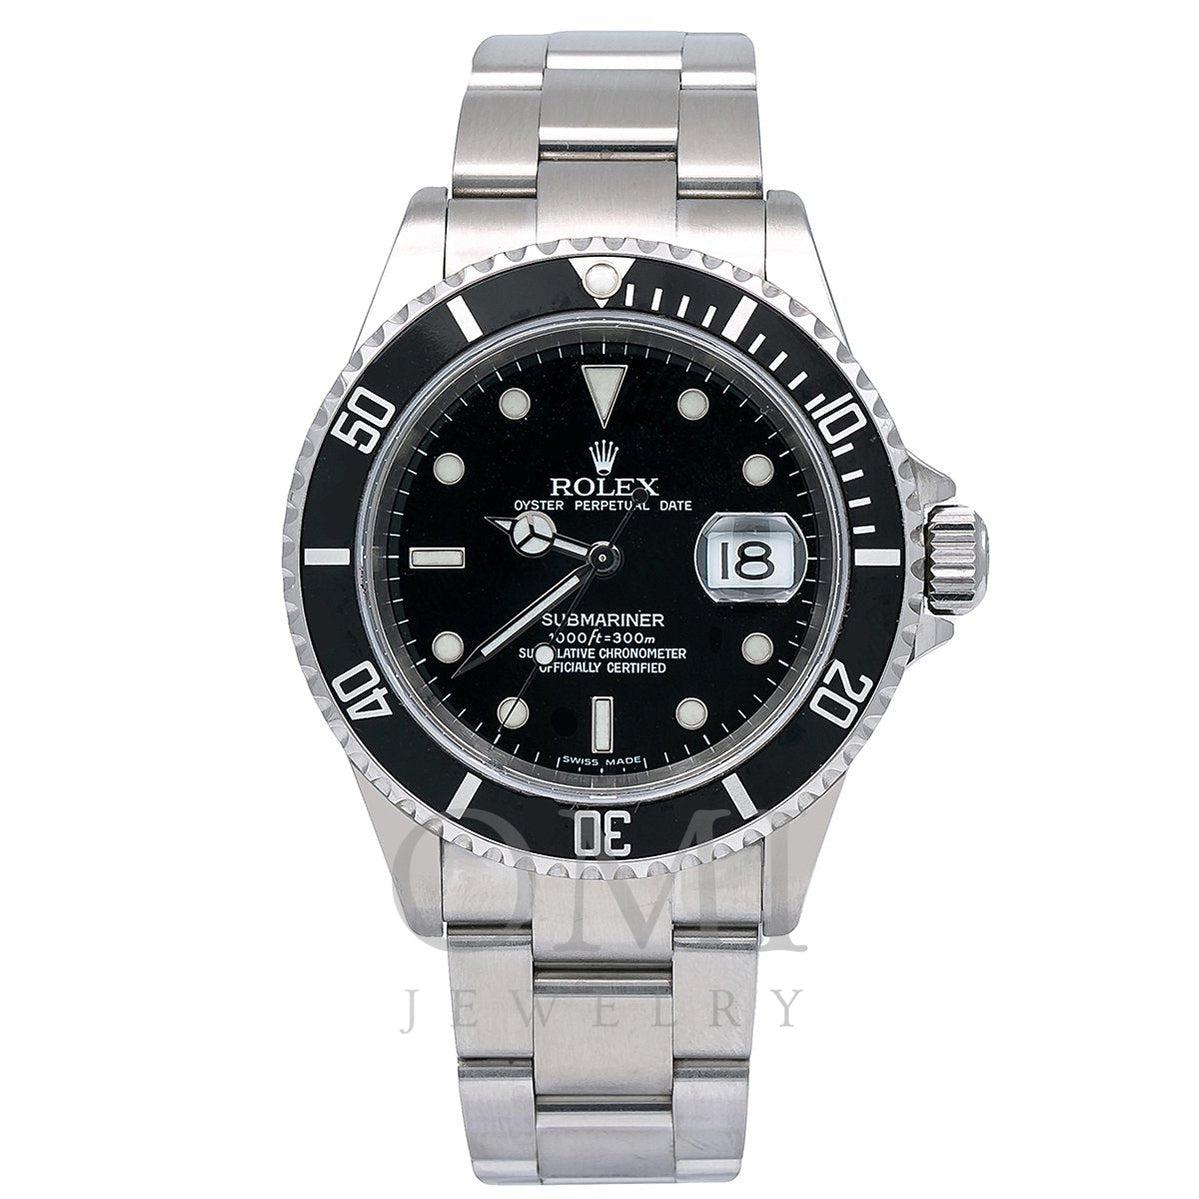 Rolex Submariner Date 16610 Black Dial With Stainless Steel Oyste - OMI Jewelry